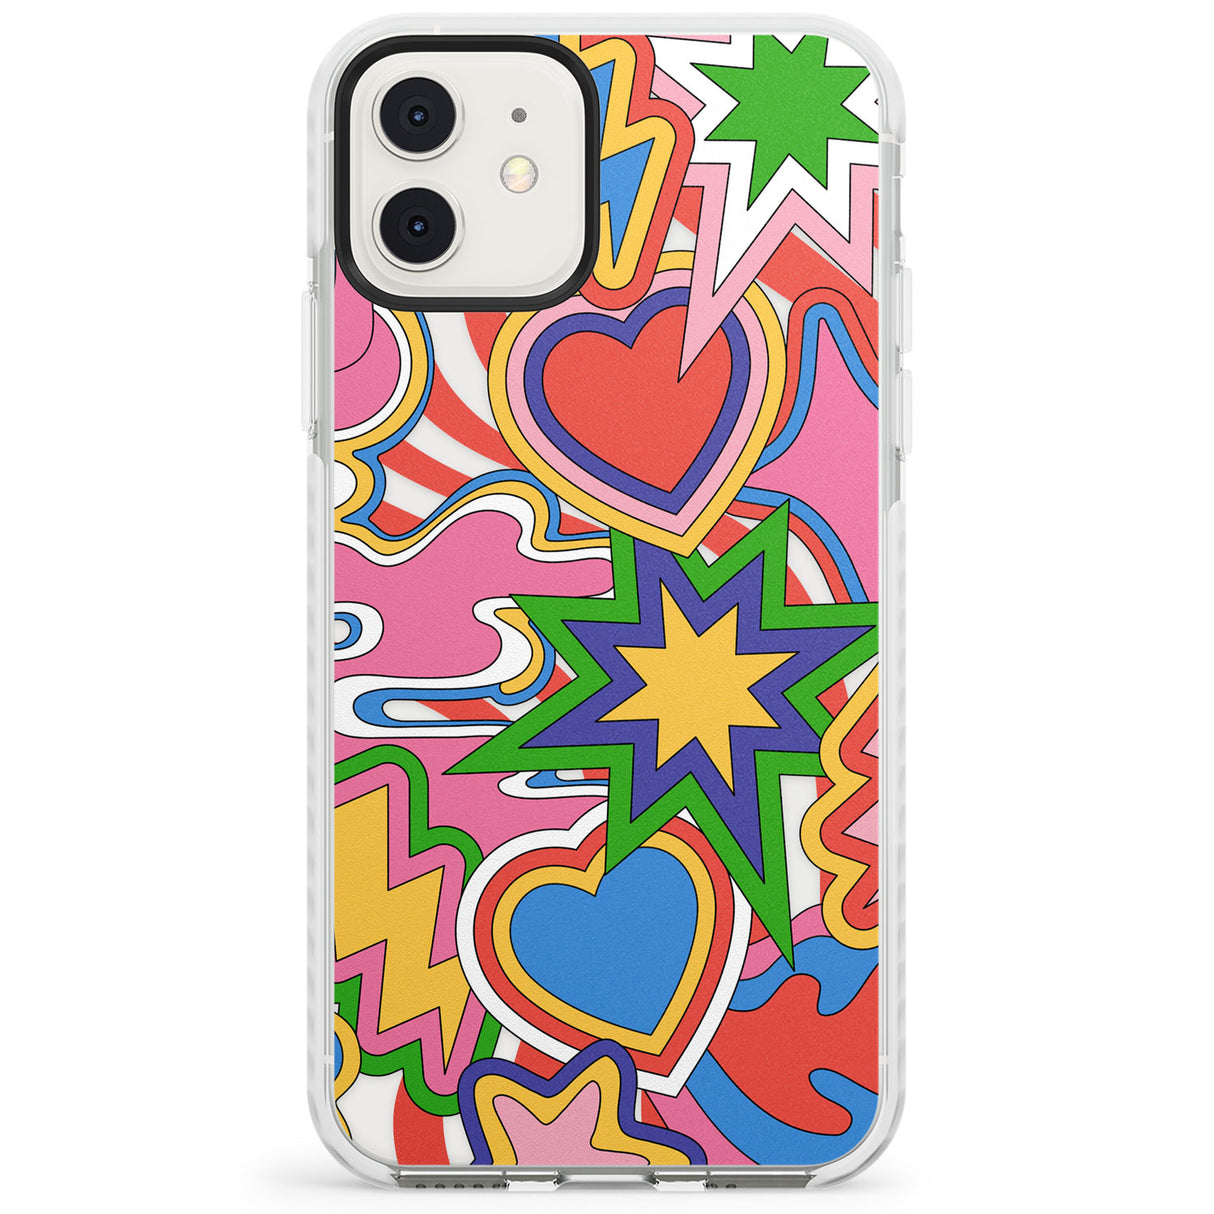 Psychedelic Pop Art Explosion Impact Phone Case for iPhone 11, iphone 12